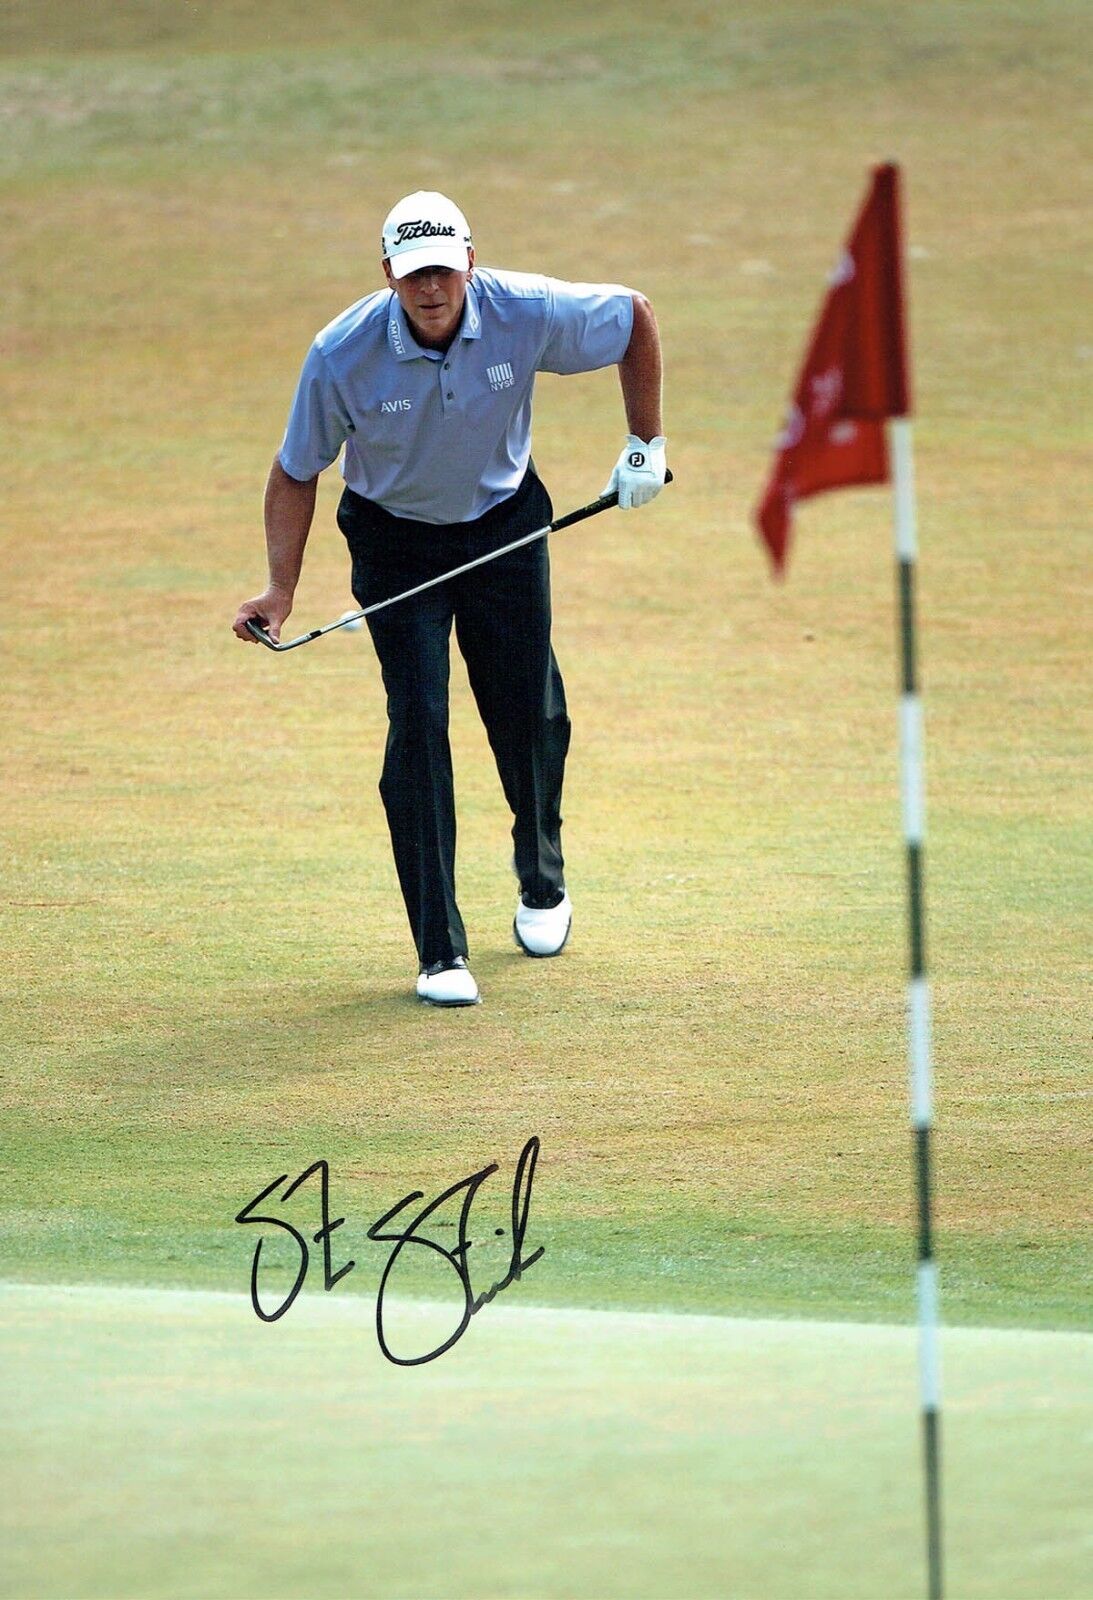 Steve STRICKER SIGNED Autograph 12x8 Photo Poster painting 1 AFTAL COA Ryder Cup WINNER Team USA